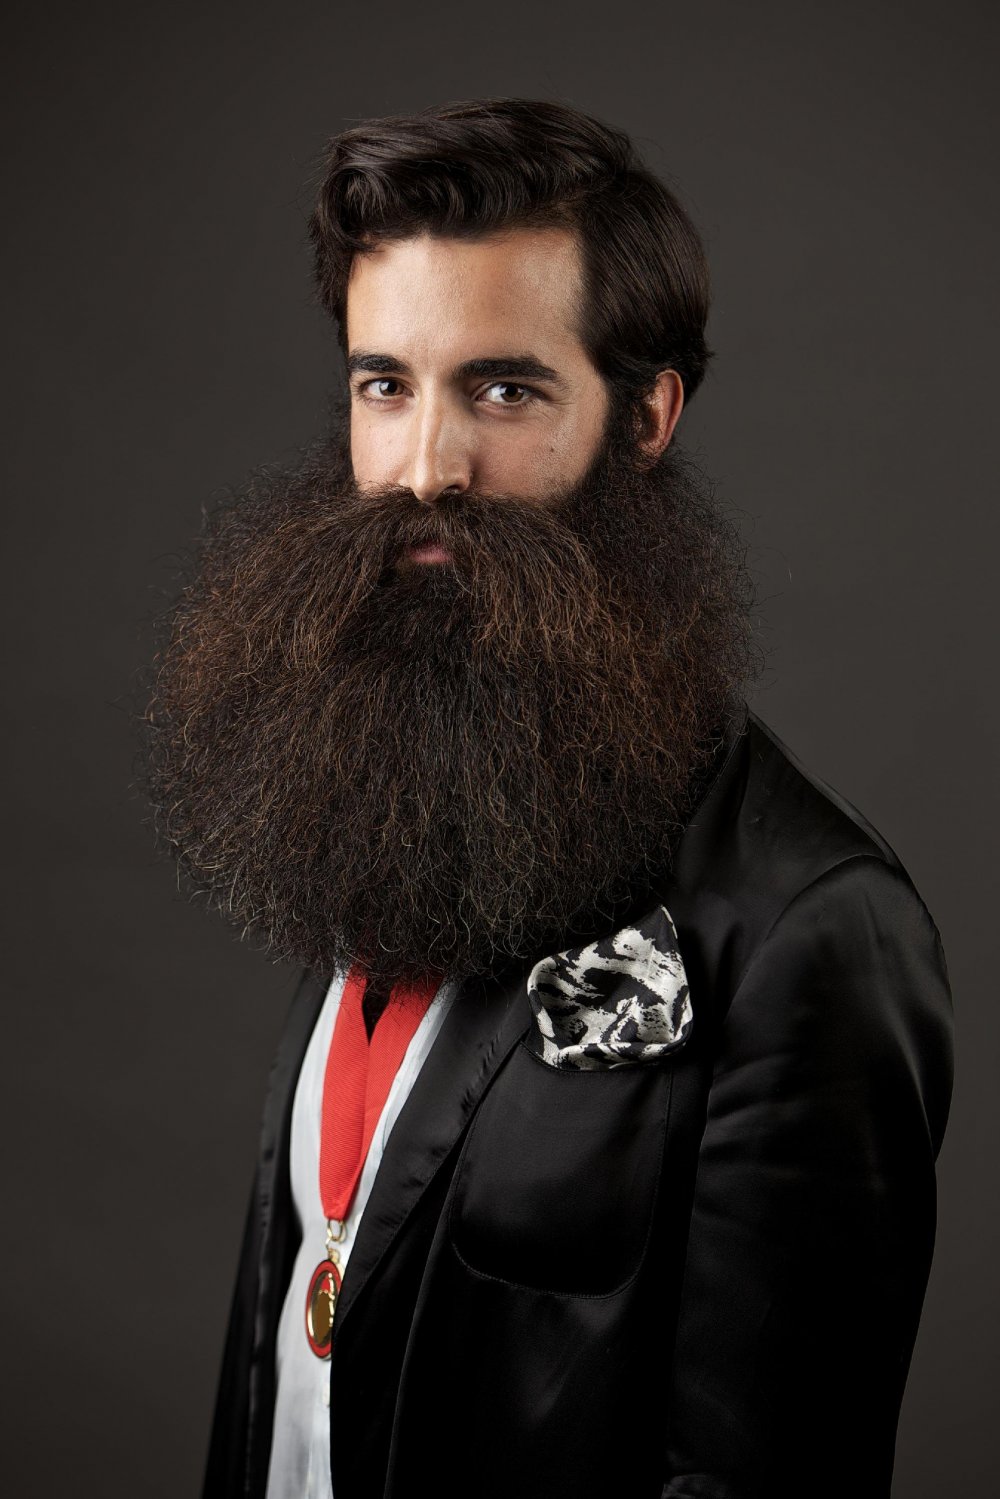 Championship of beards and barbel in Portland